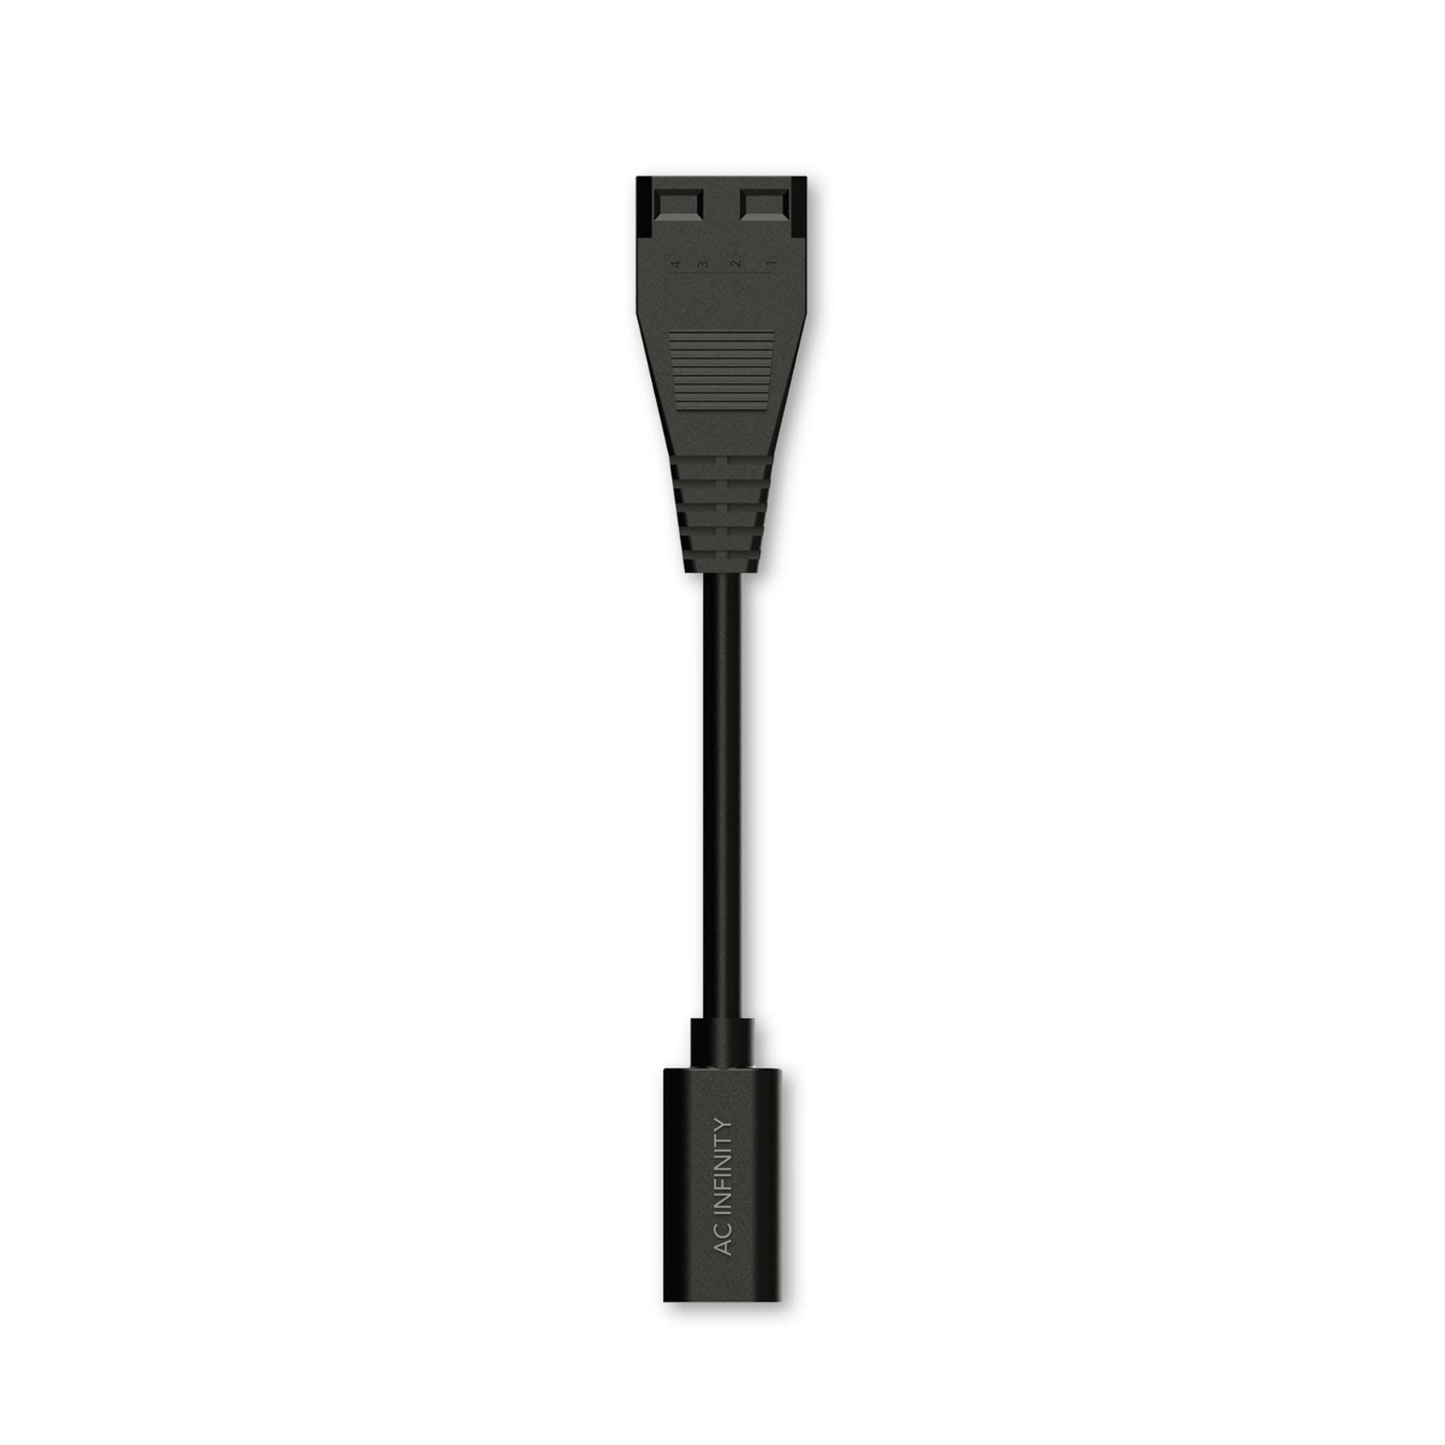 AC Infinity UIS to Molex Port Adapter Dongle, Conversion Cable Cord AC-ADQ3 Accessories